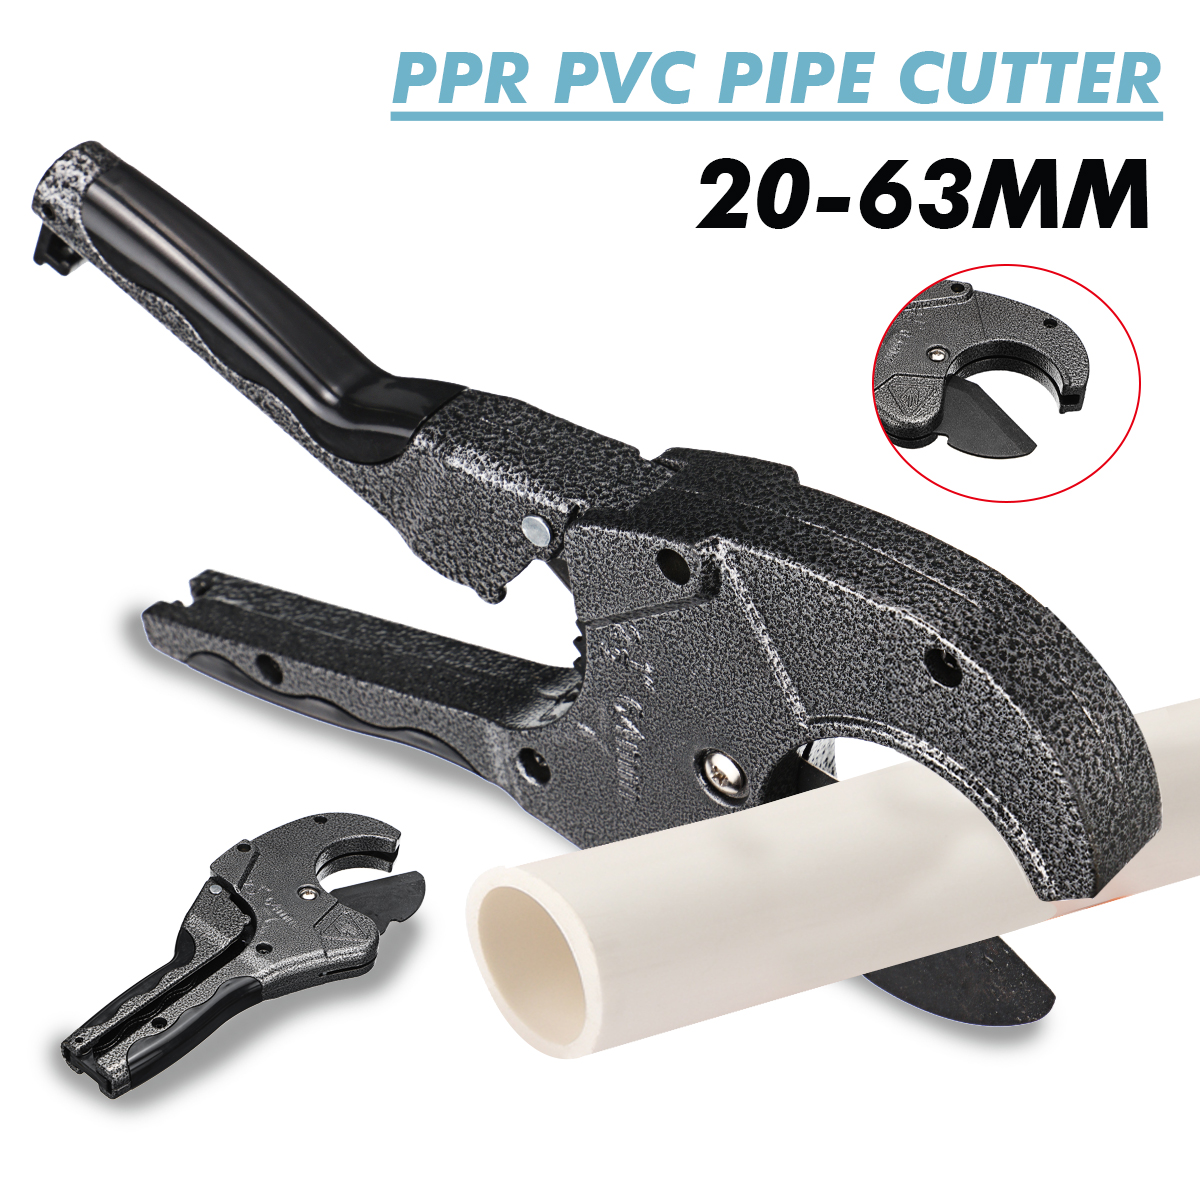 Aluminum-Alloy-Portable-PVC-PPR-Pipe-Cutter-Hose-Ratchet-Action-Up-To-63mm-Tube-1869999-2